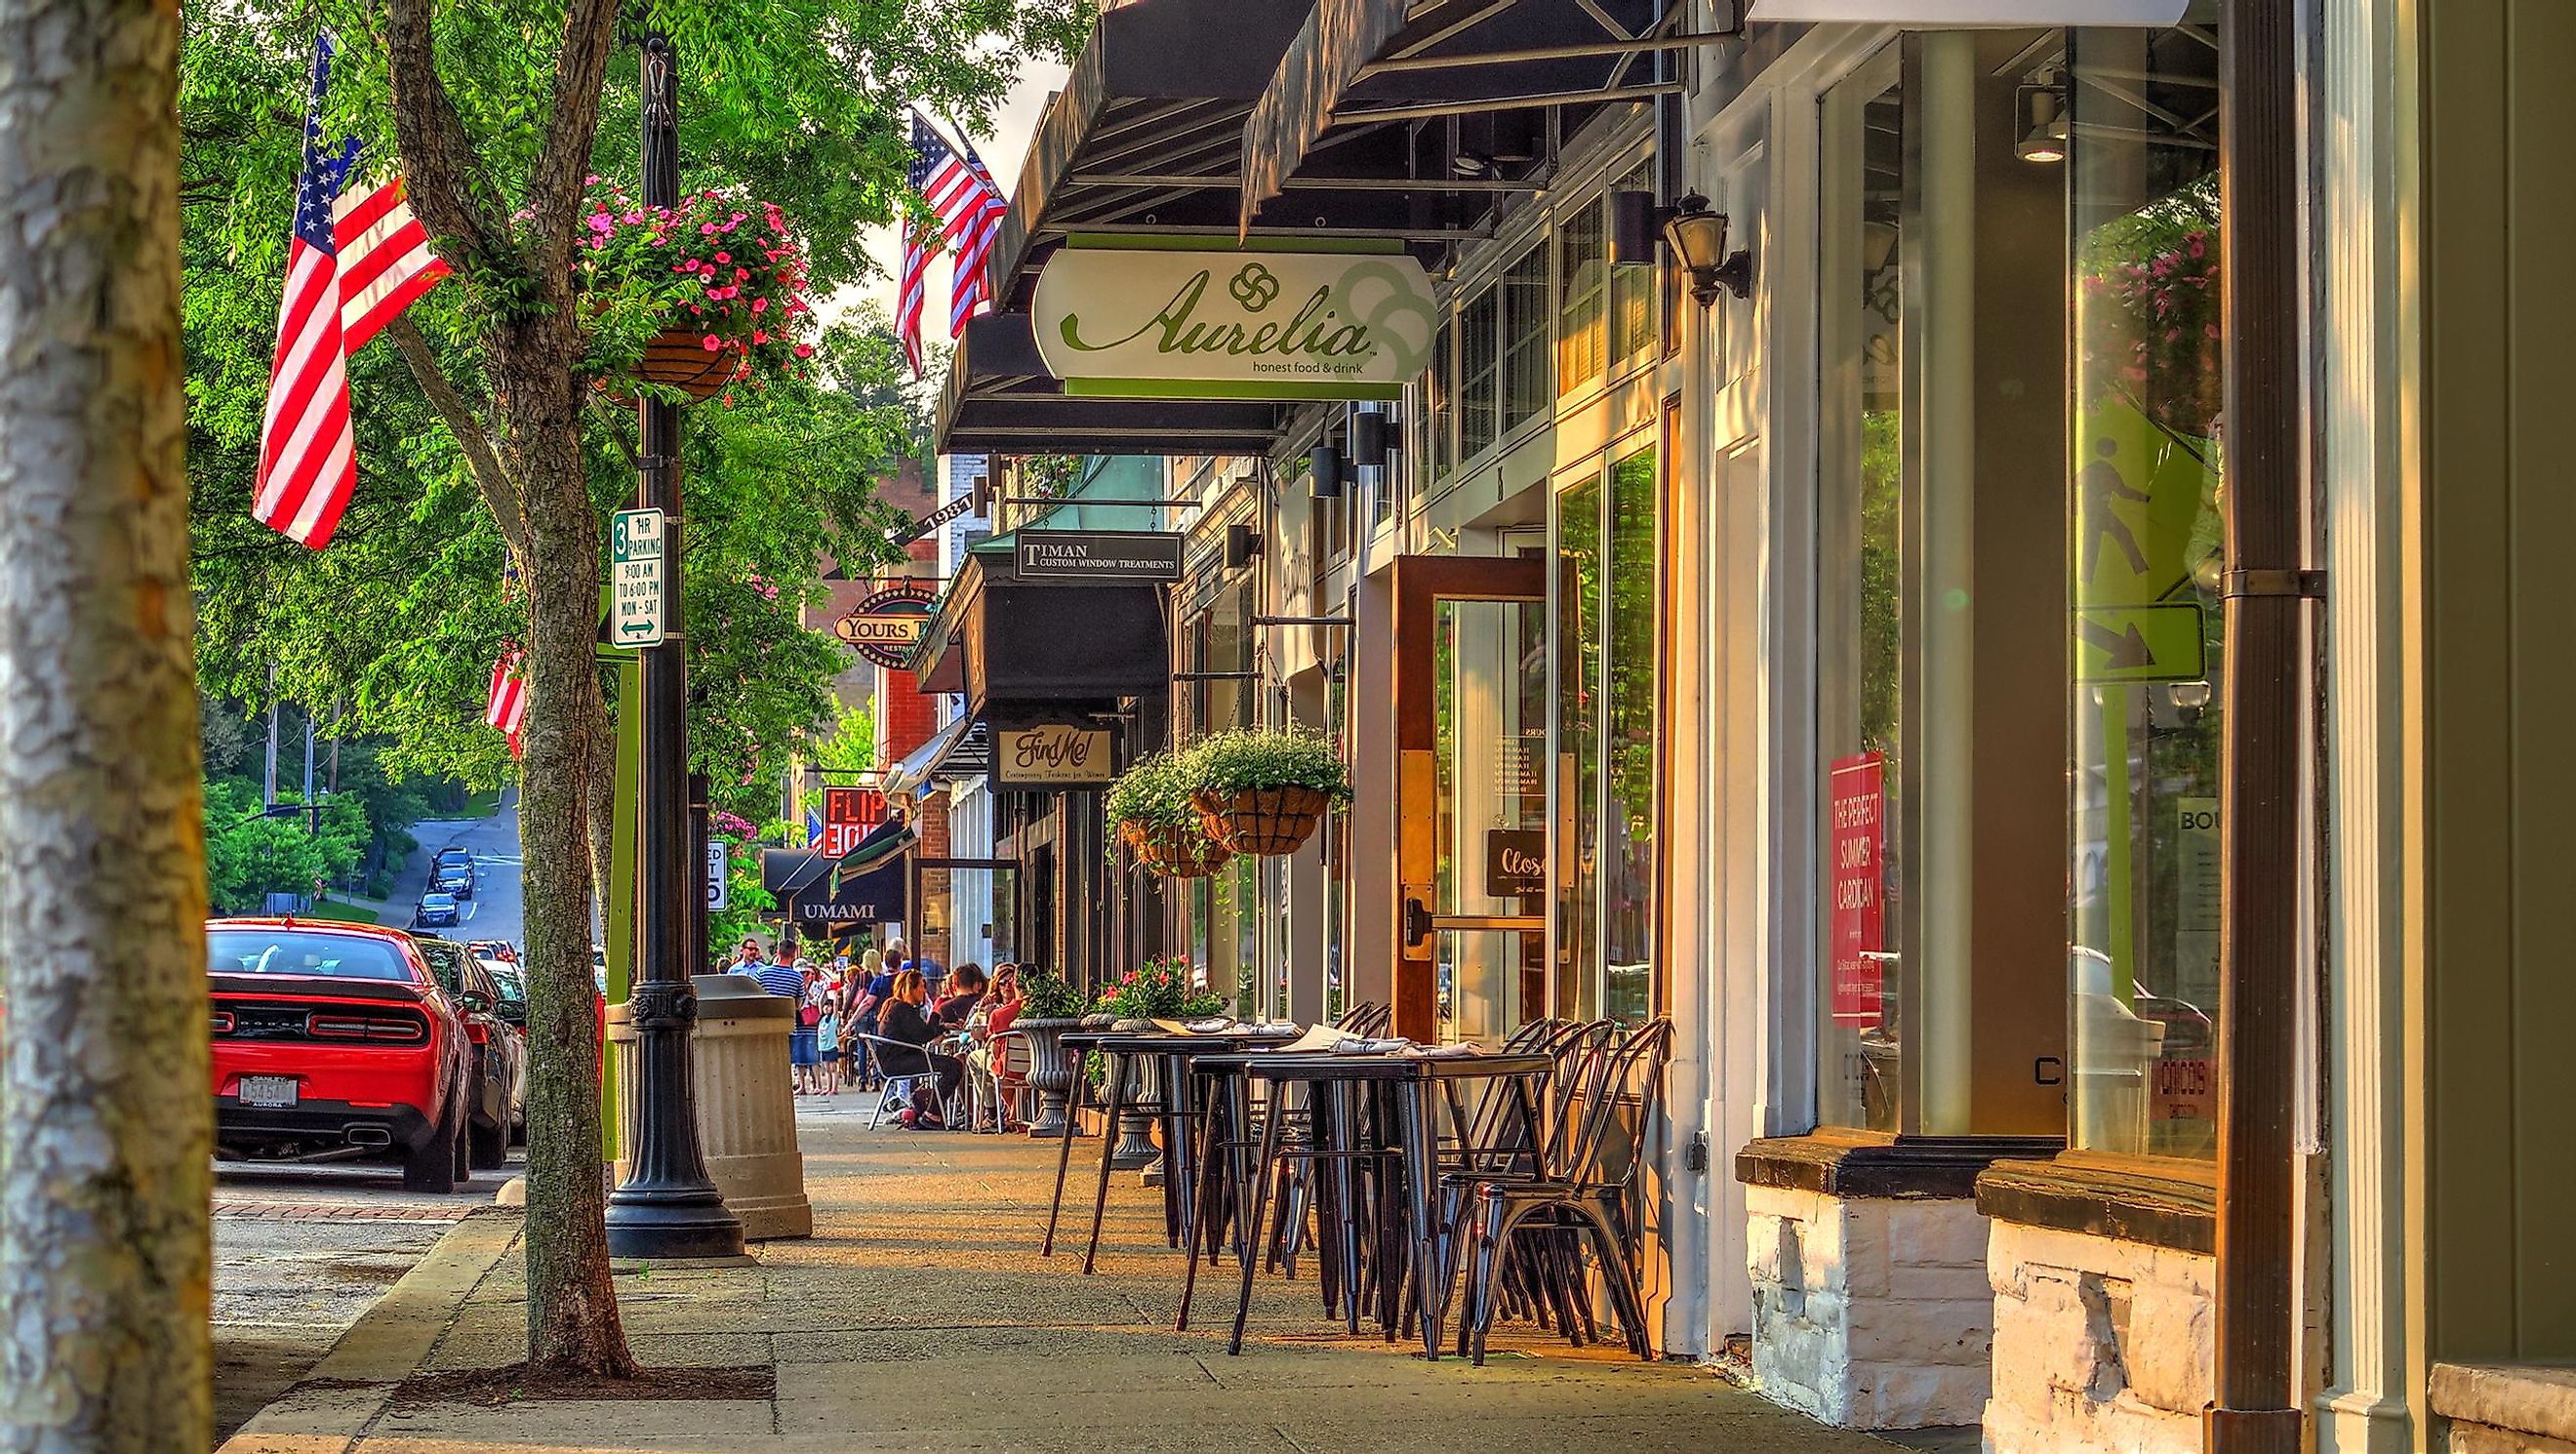 Shops on Main Street in the Business District of Historical Downtown Chagrin Falls, Ohio